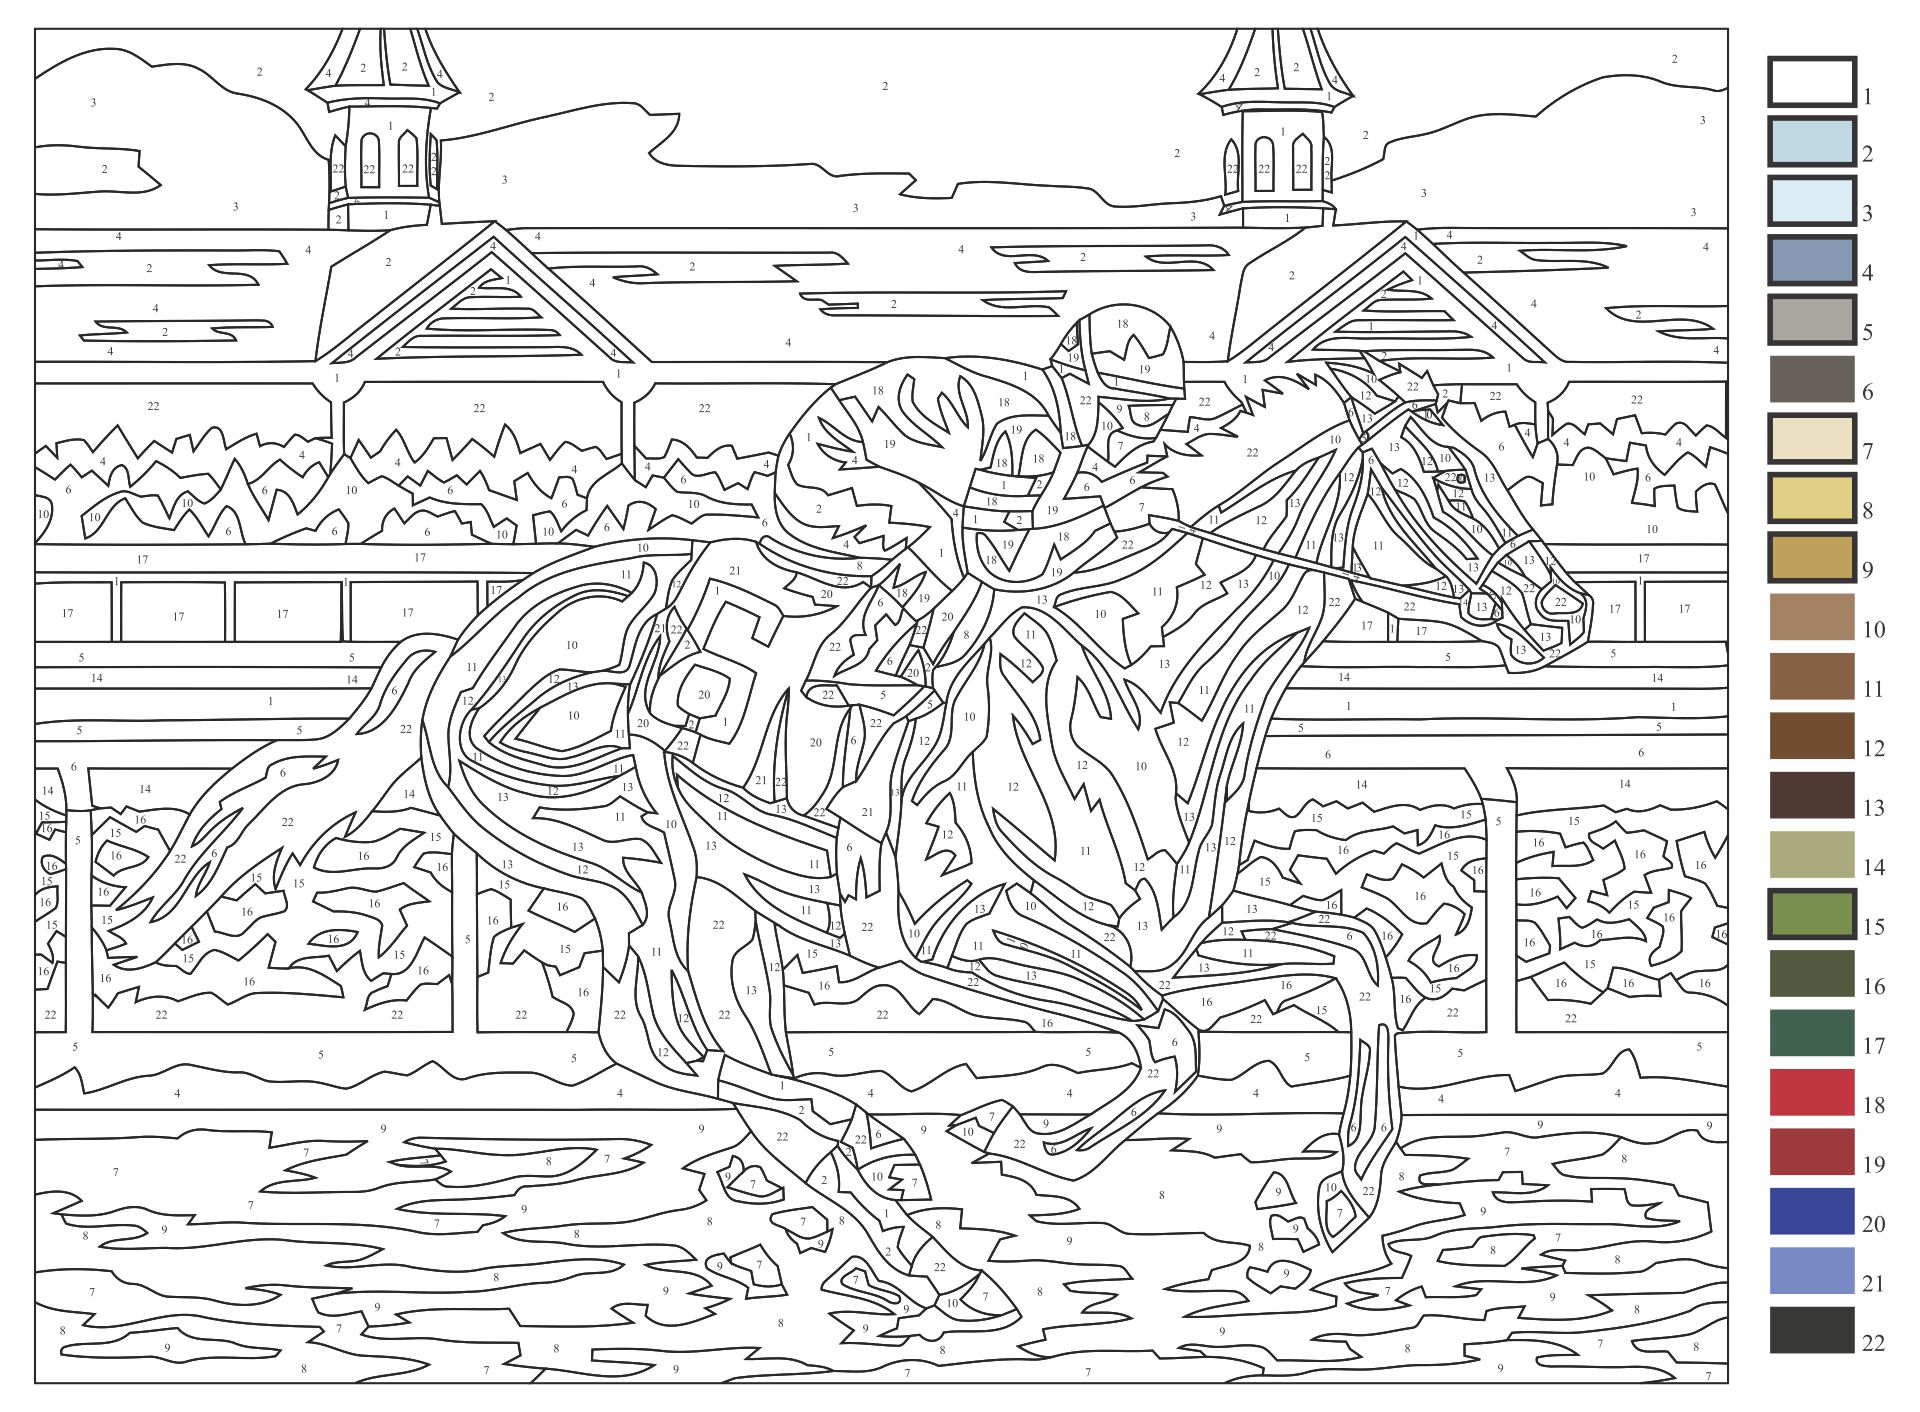 coloring pages for teenagers difficult color by number